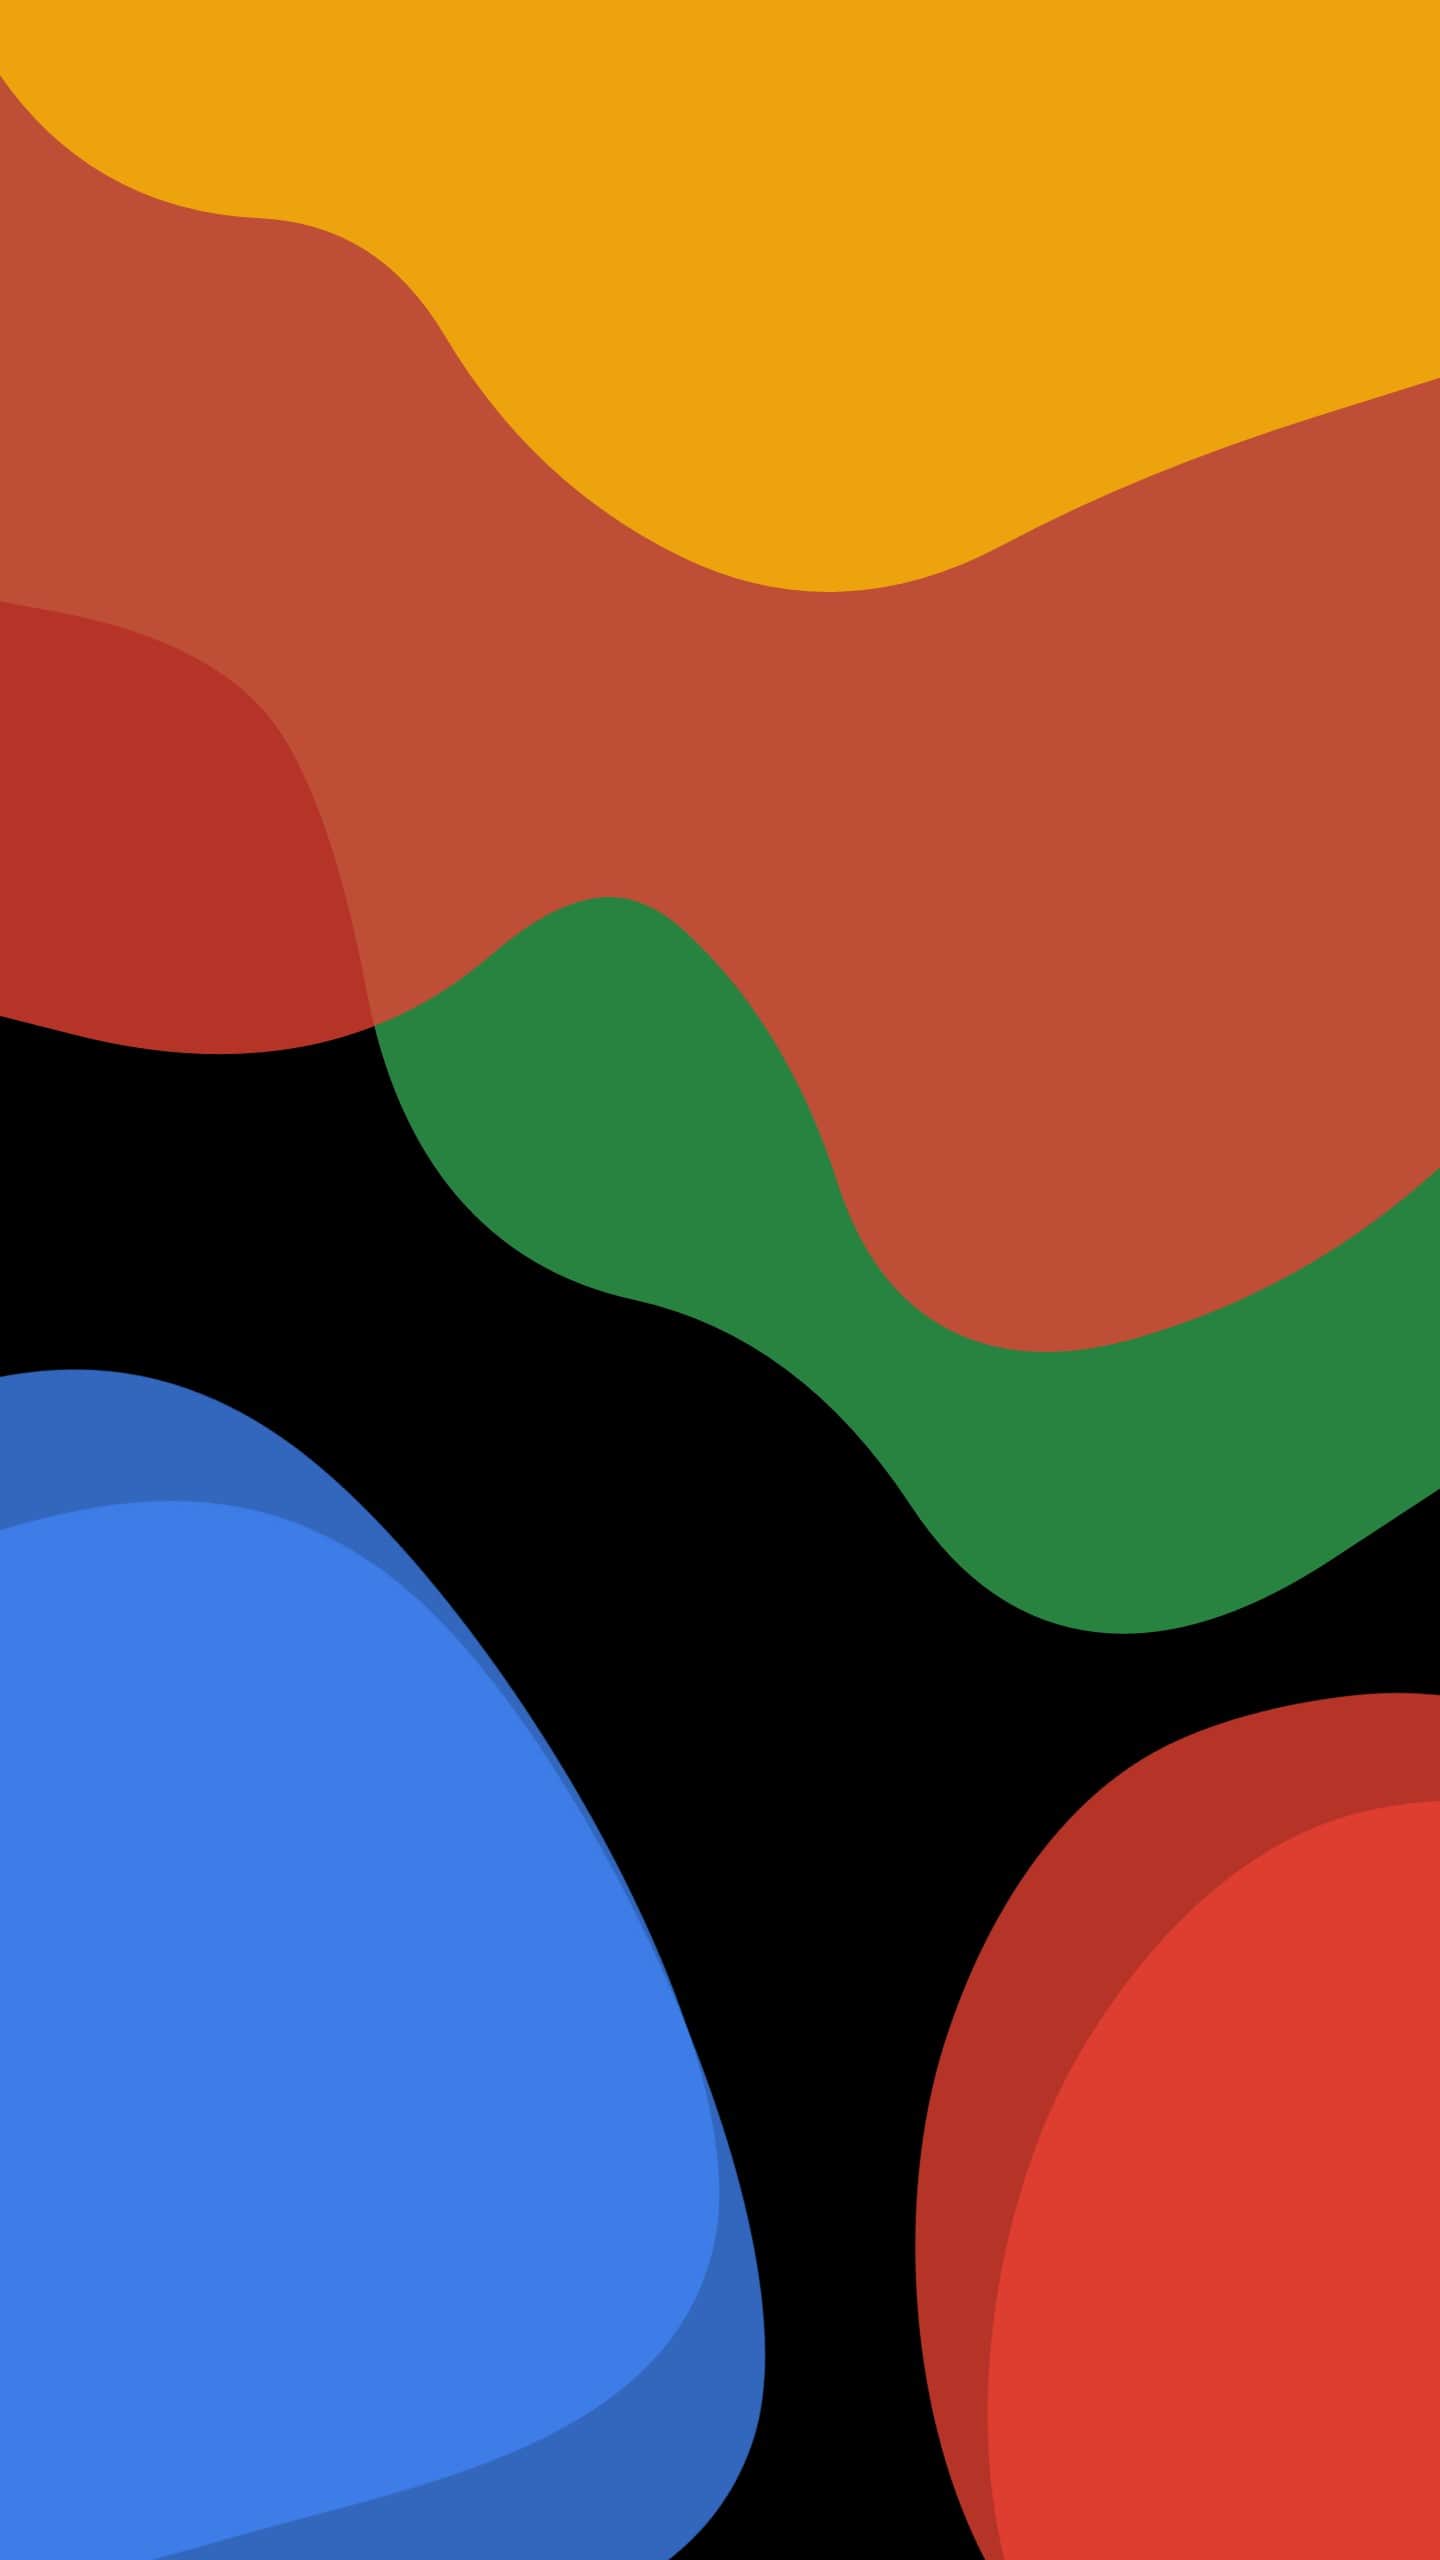 Google Pixel 5 Wallpaper Download Here Are The Official Pixel 5 Wallpapers Download 9to5google In This Article You Will Be Able To Download The New Wallpapers For The New Google